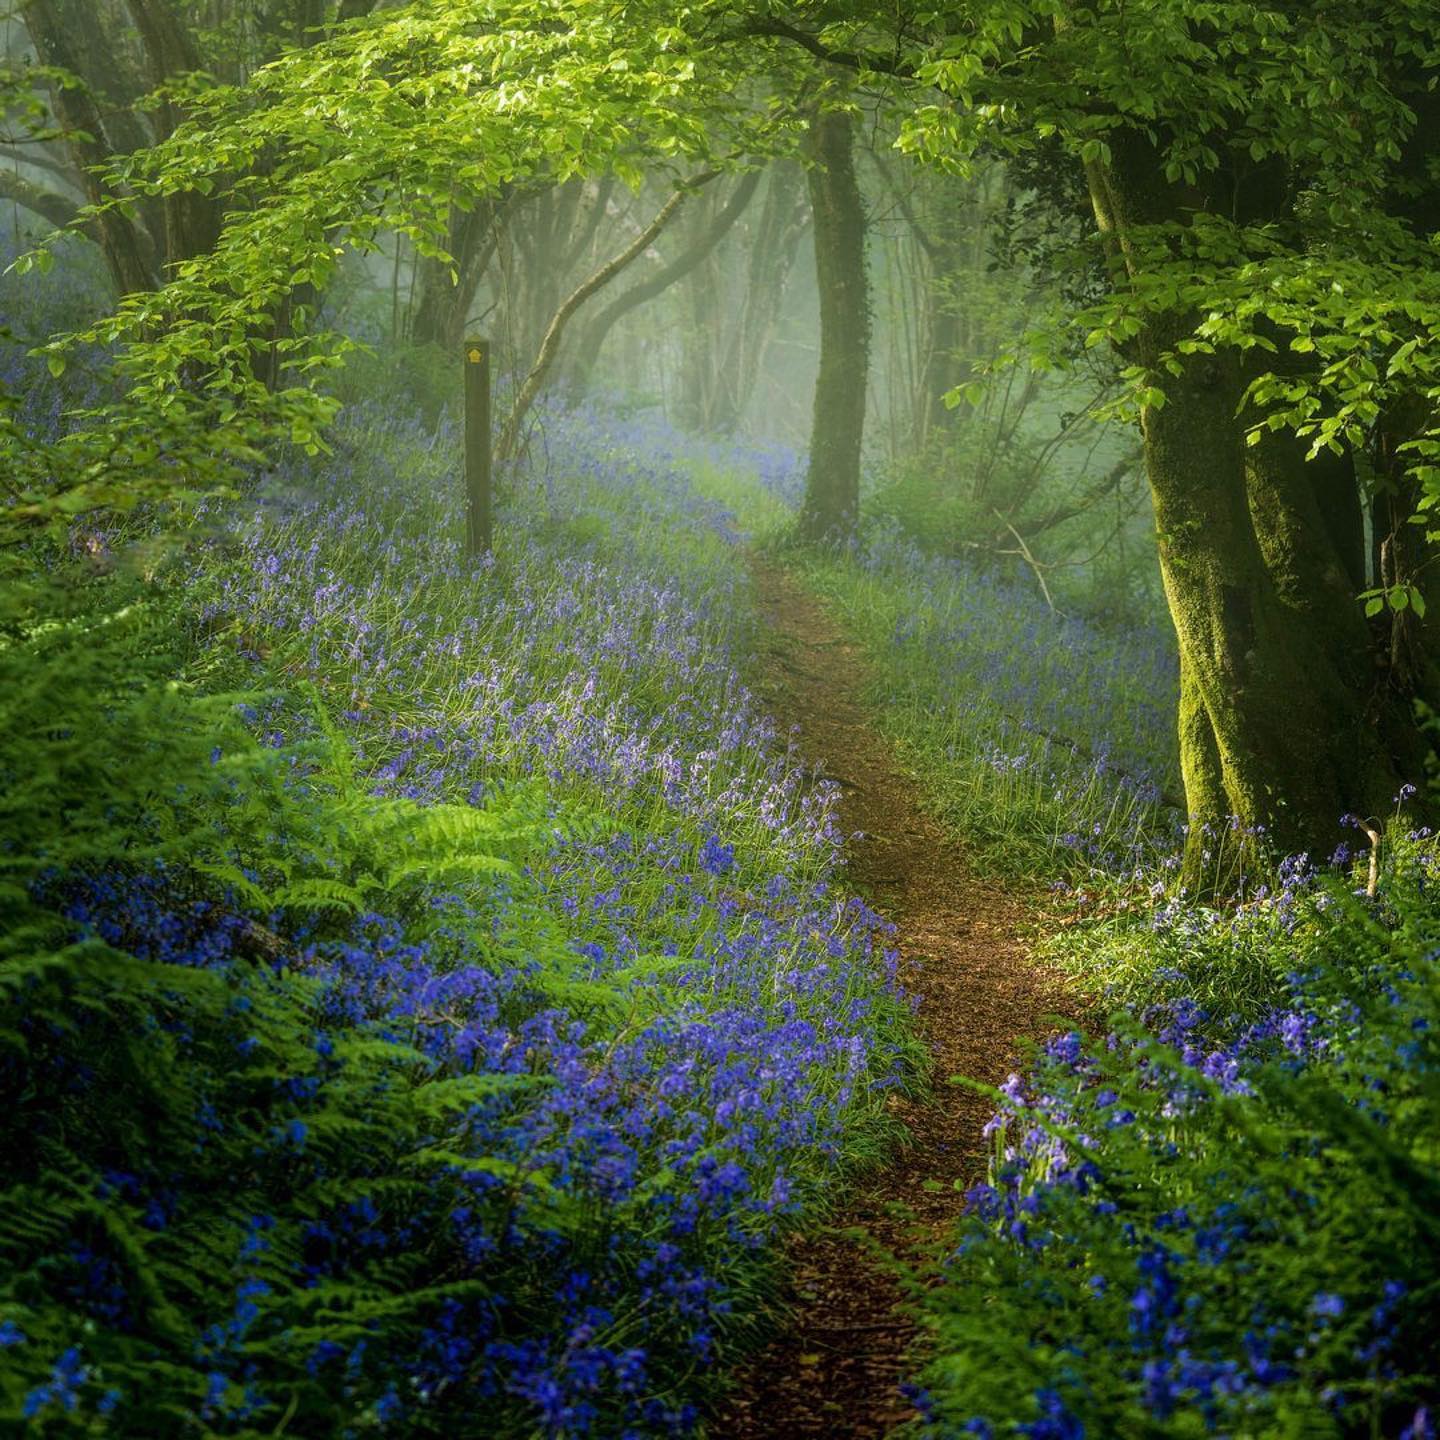 A magical scene in a Devonshire wood 